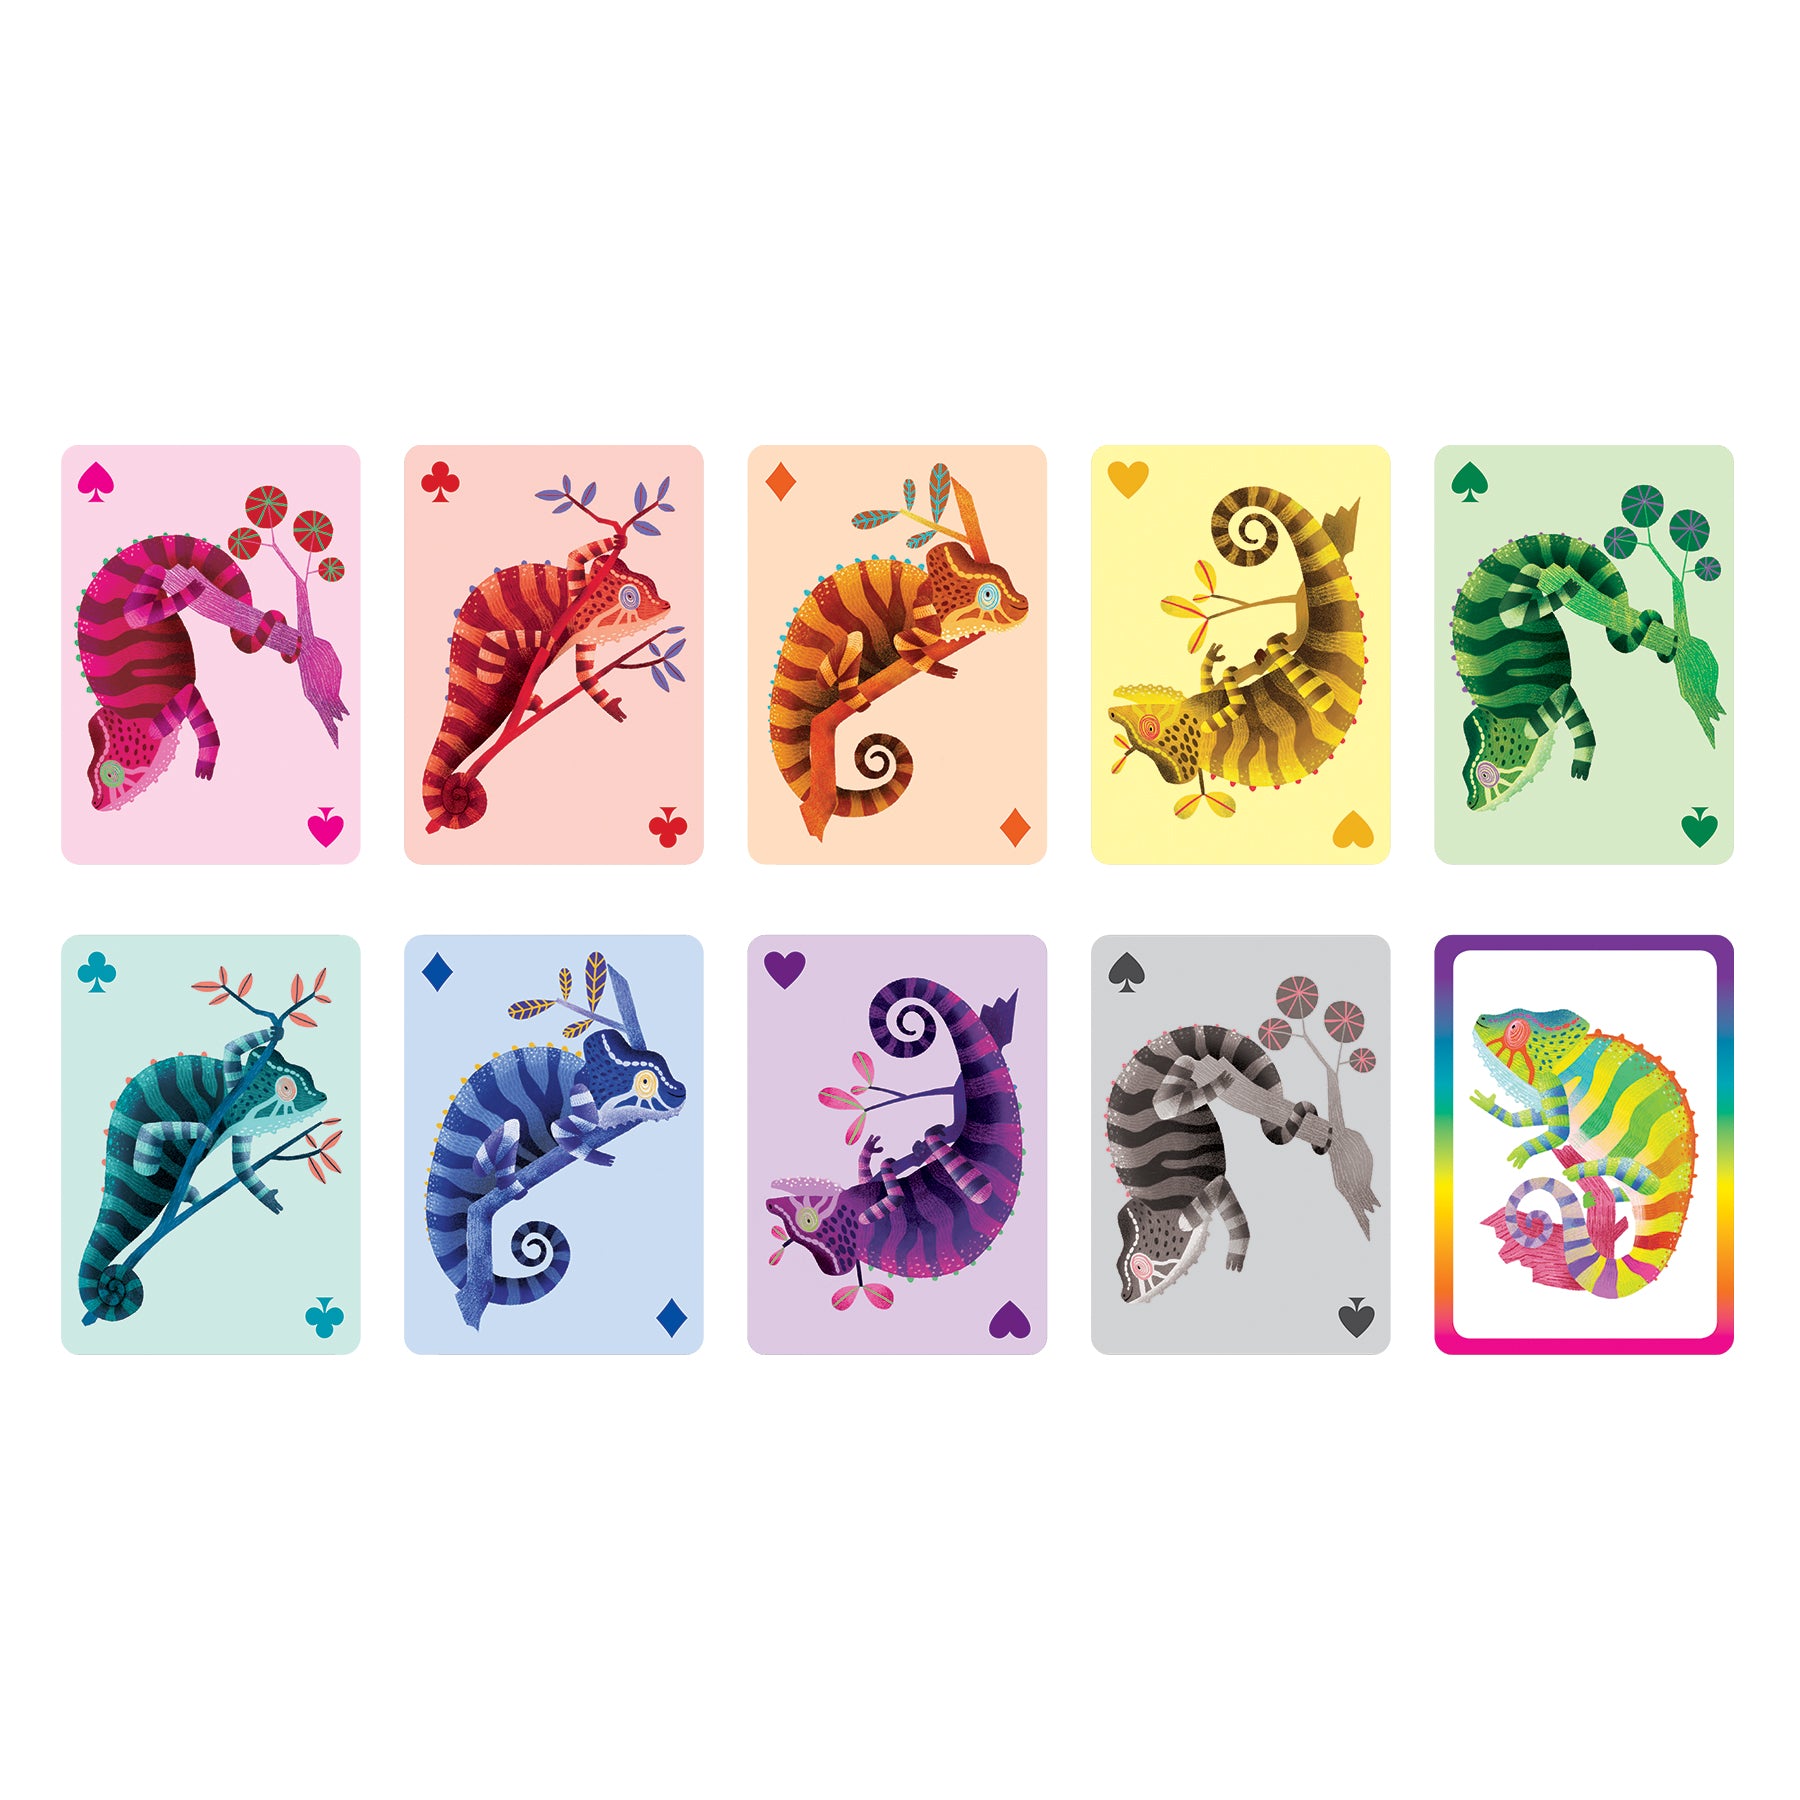 Mud Puppy | Playing Cards - Crazy Chameleon!